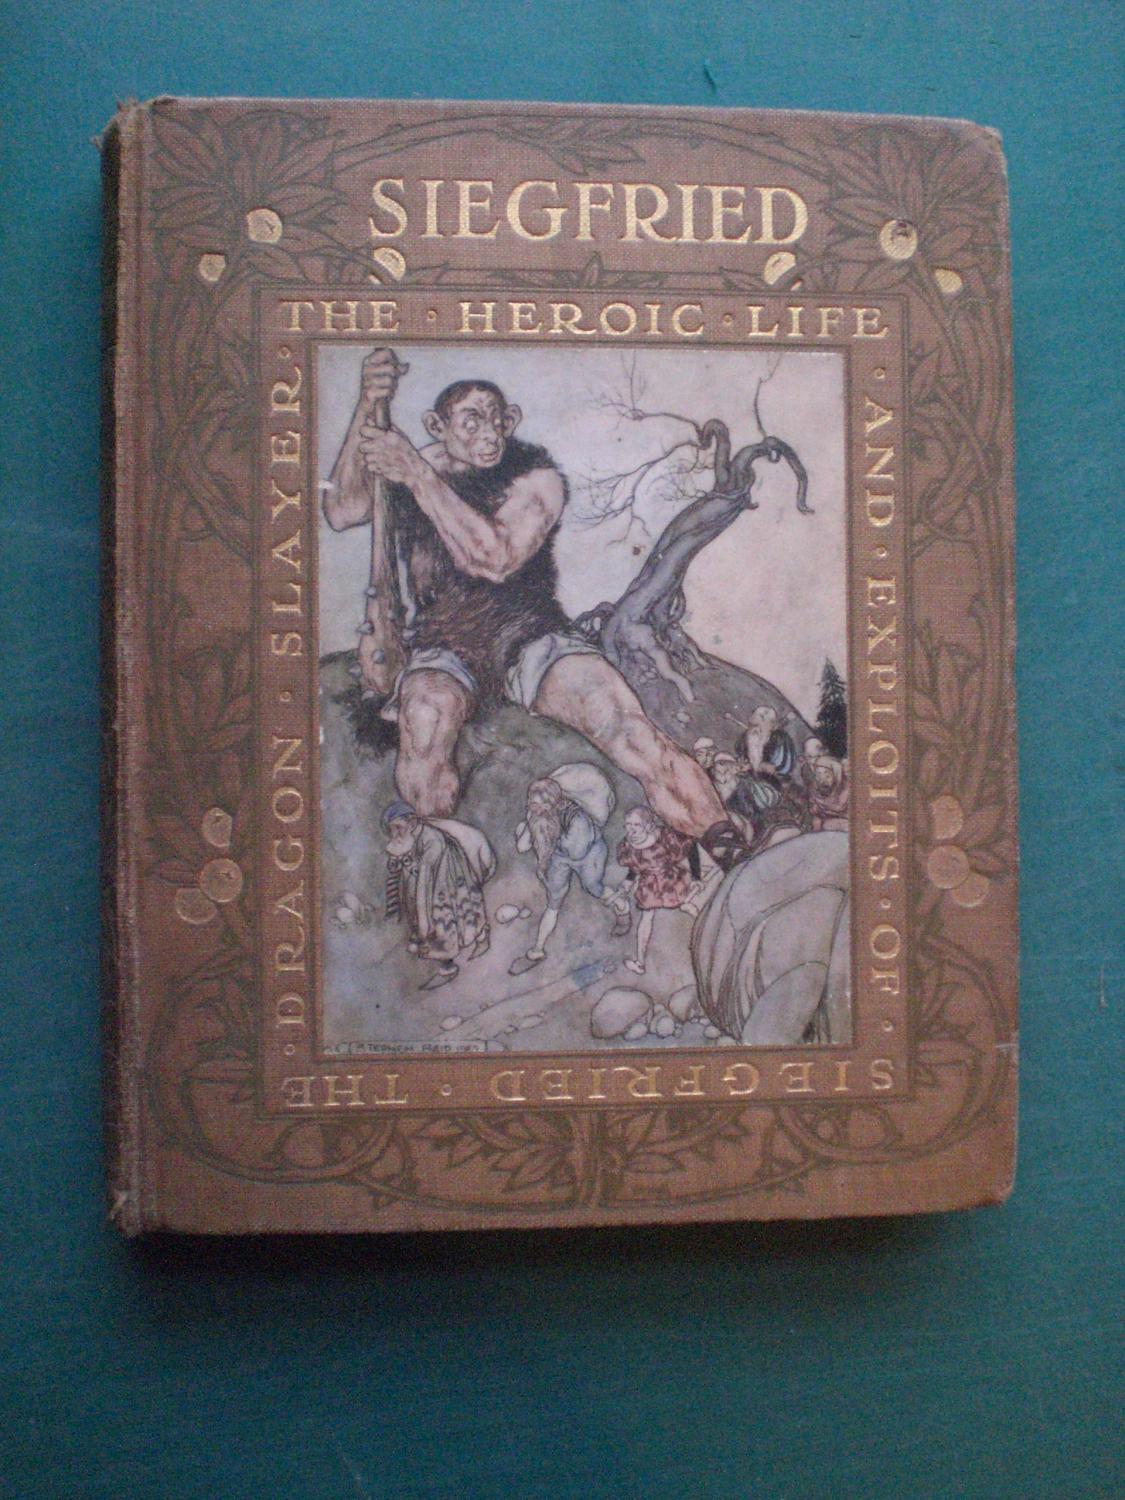 The Heroic Life and Exploits of Siegfried the Dragon Slayer